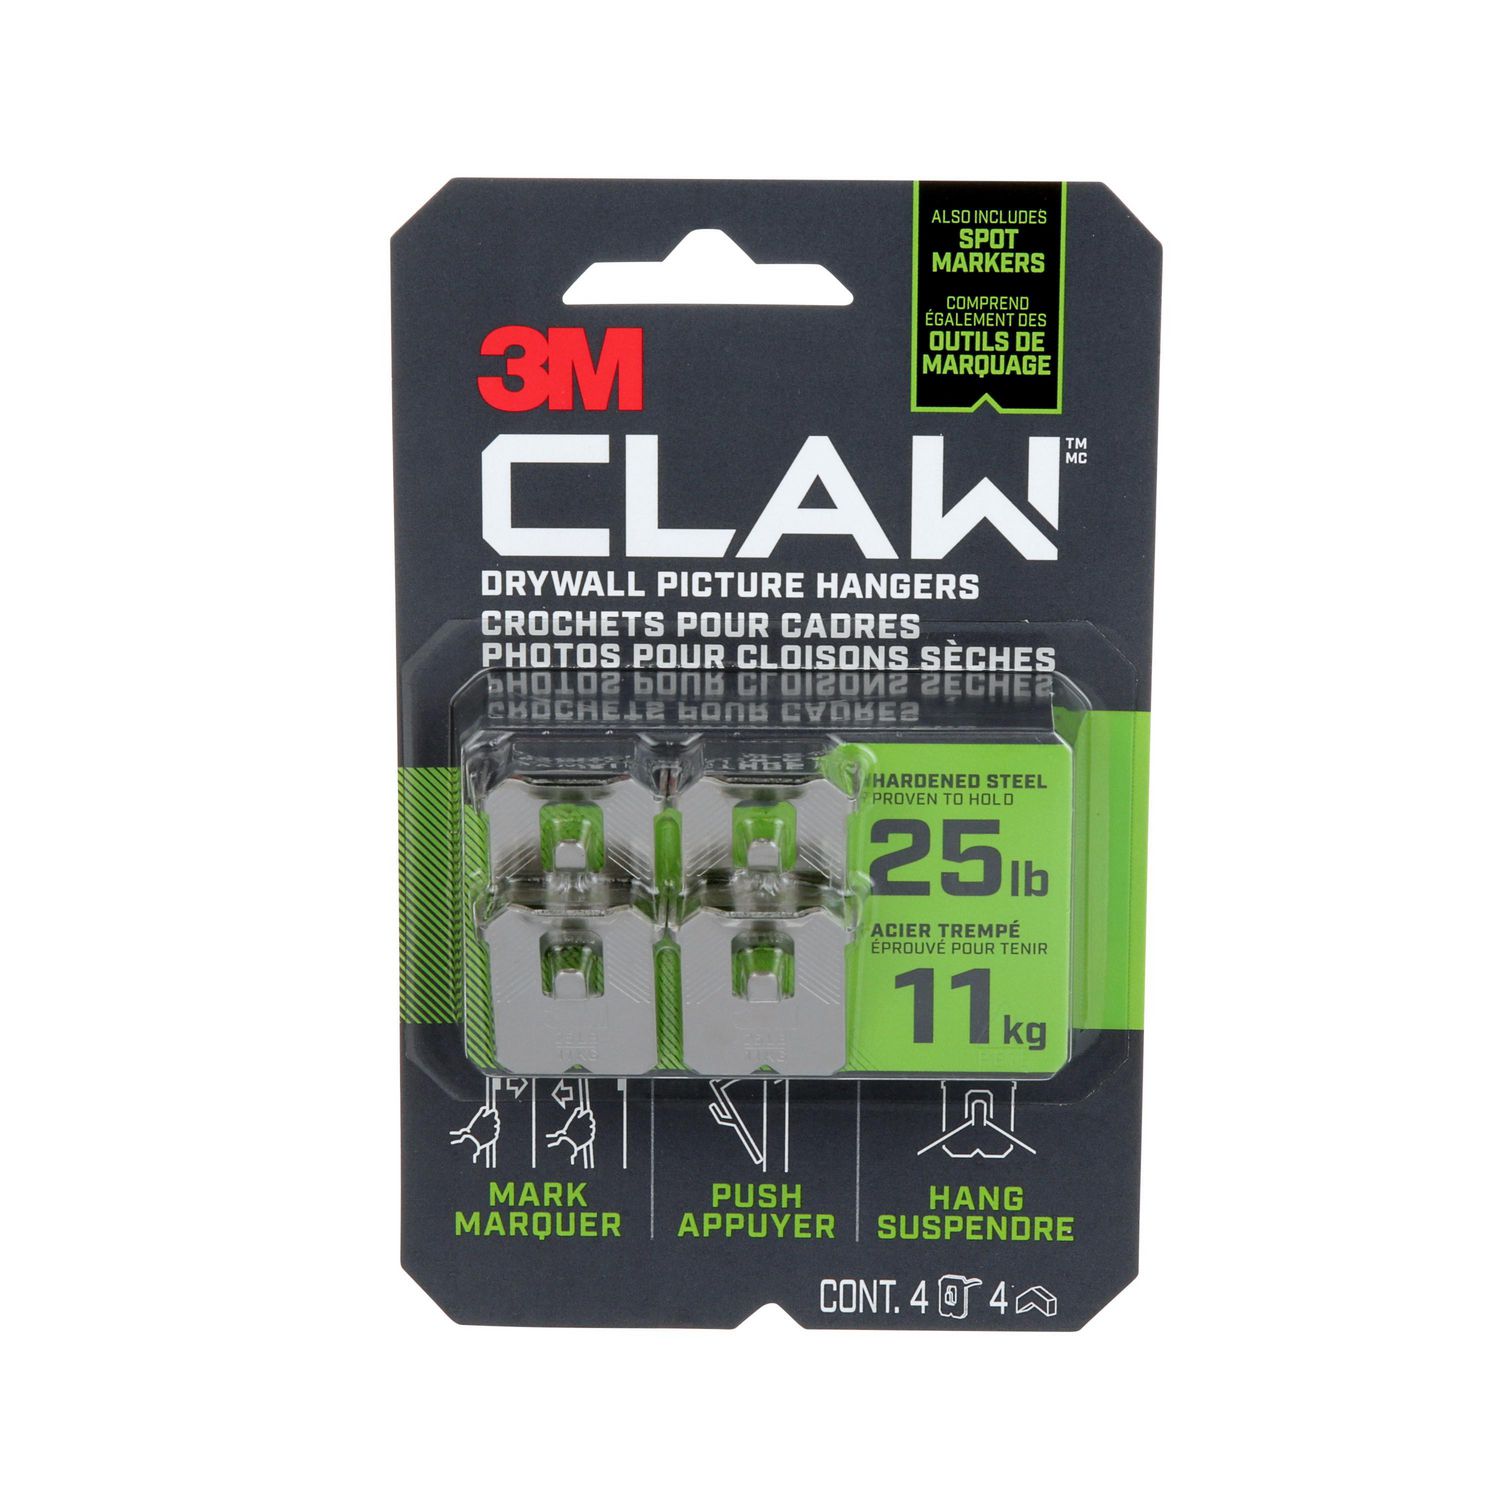 3M™ CLAW Drywall Picture Hanger with Temporary Spot Marker 3PH25M